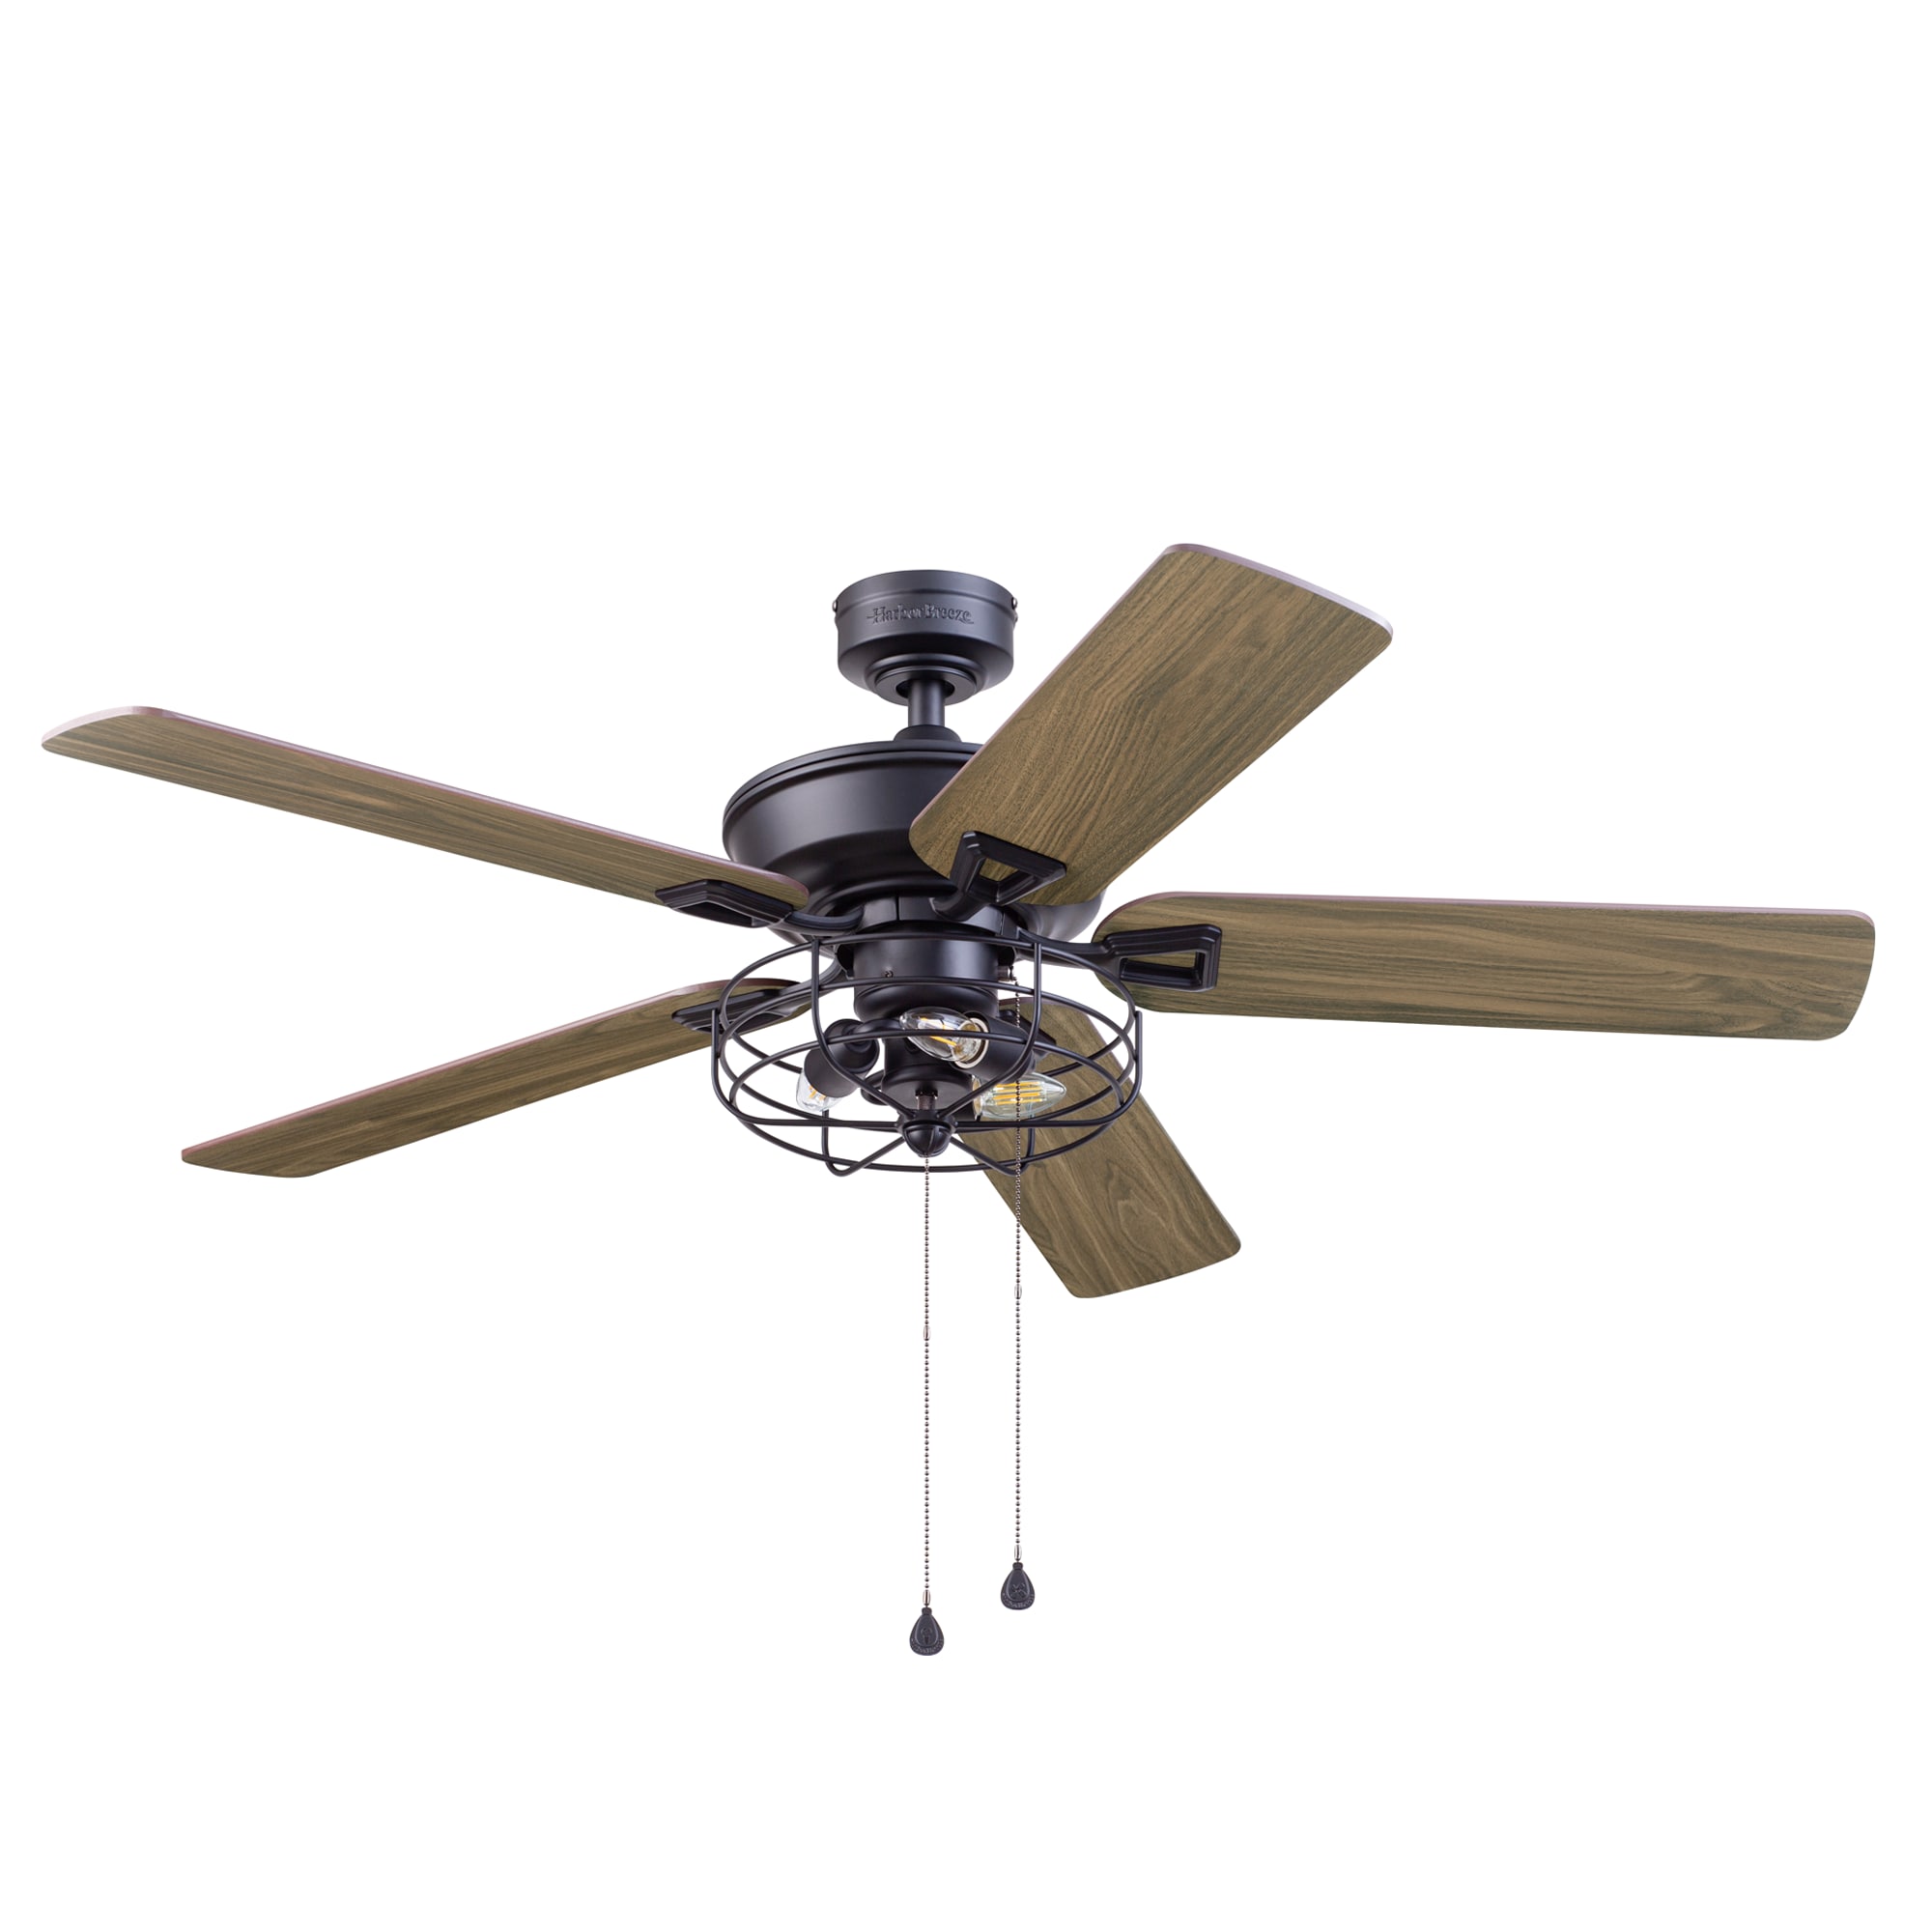 Black Industrial Ceiling Fans At Com, Black Industrial Ceiling Fan With Remote Control